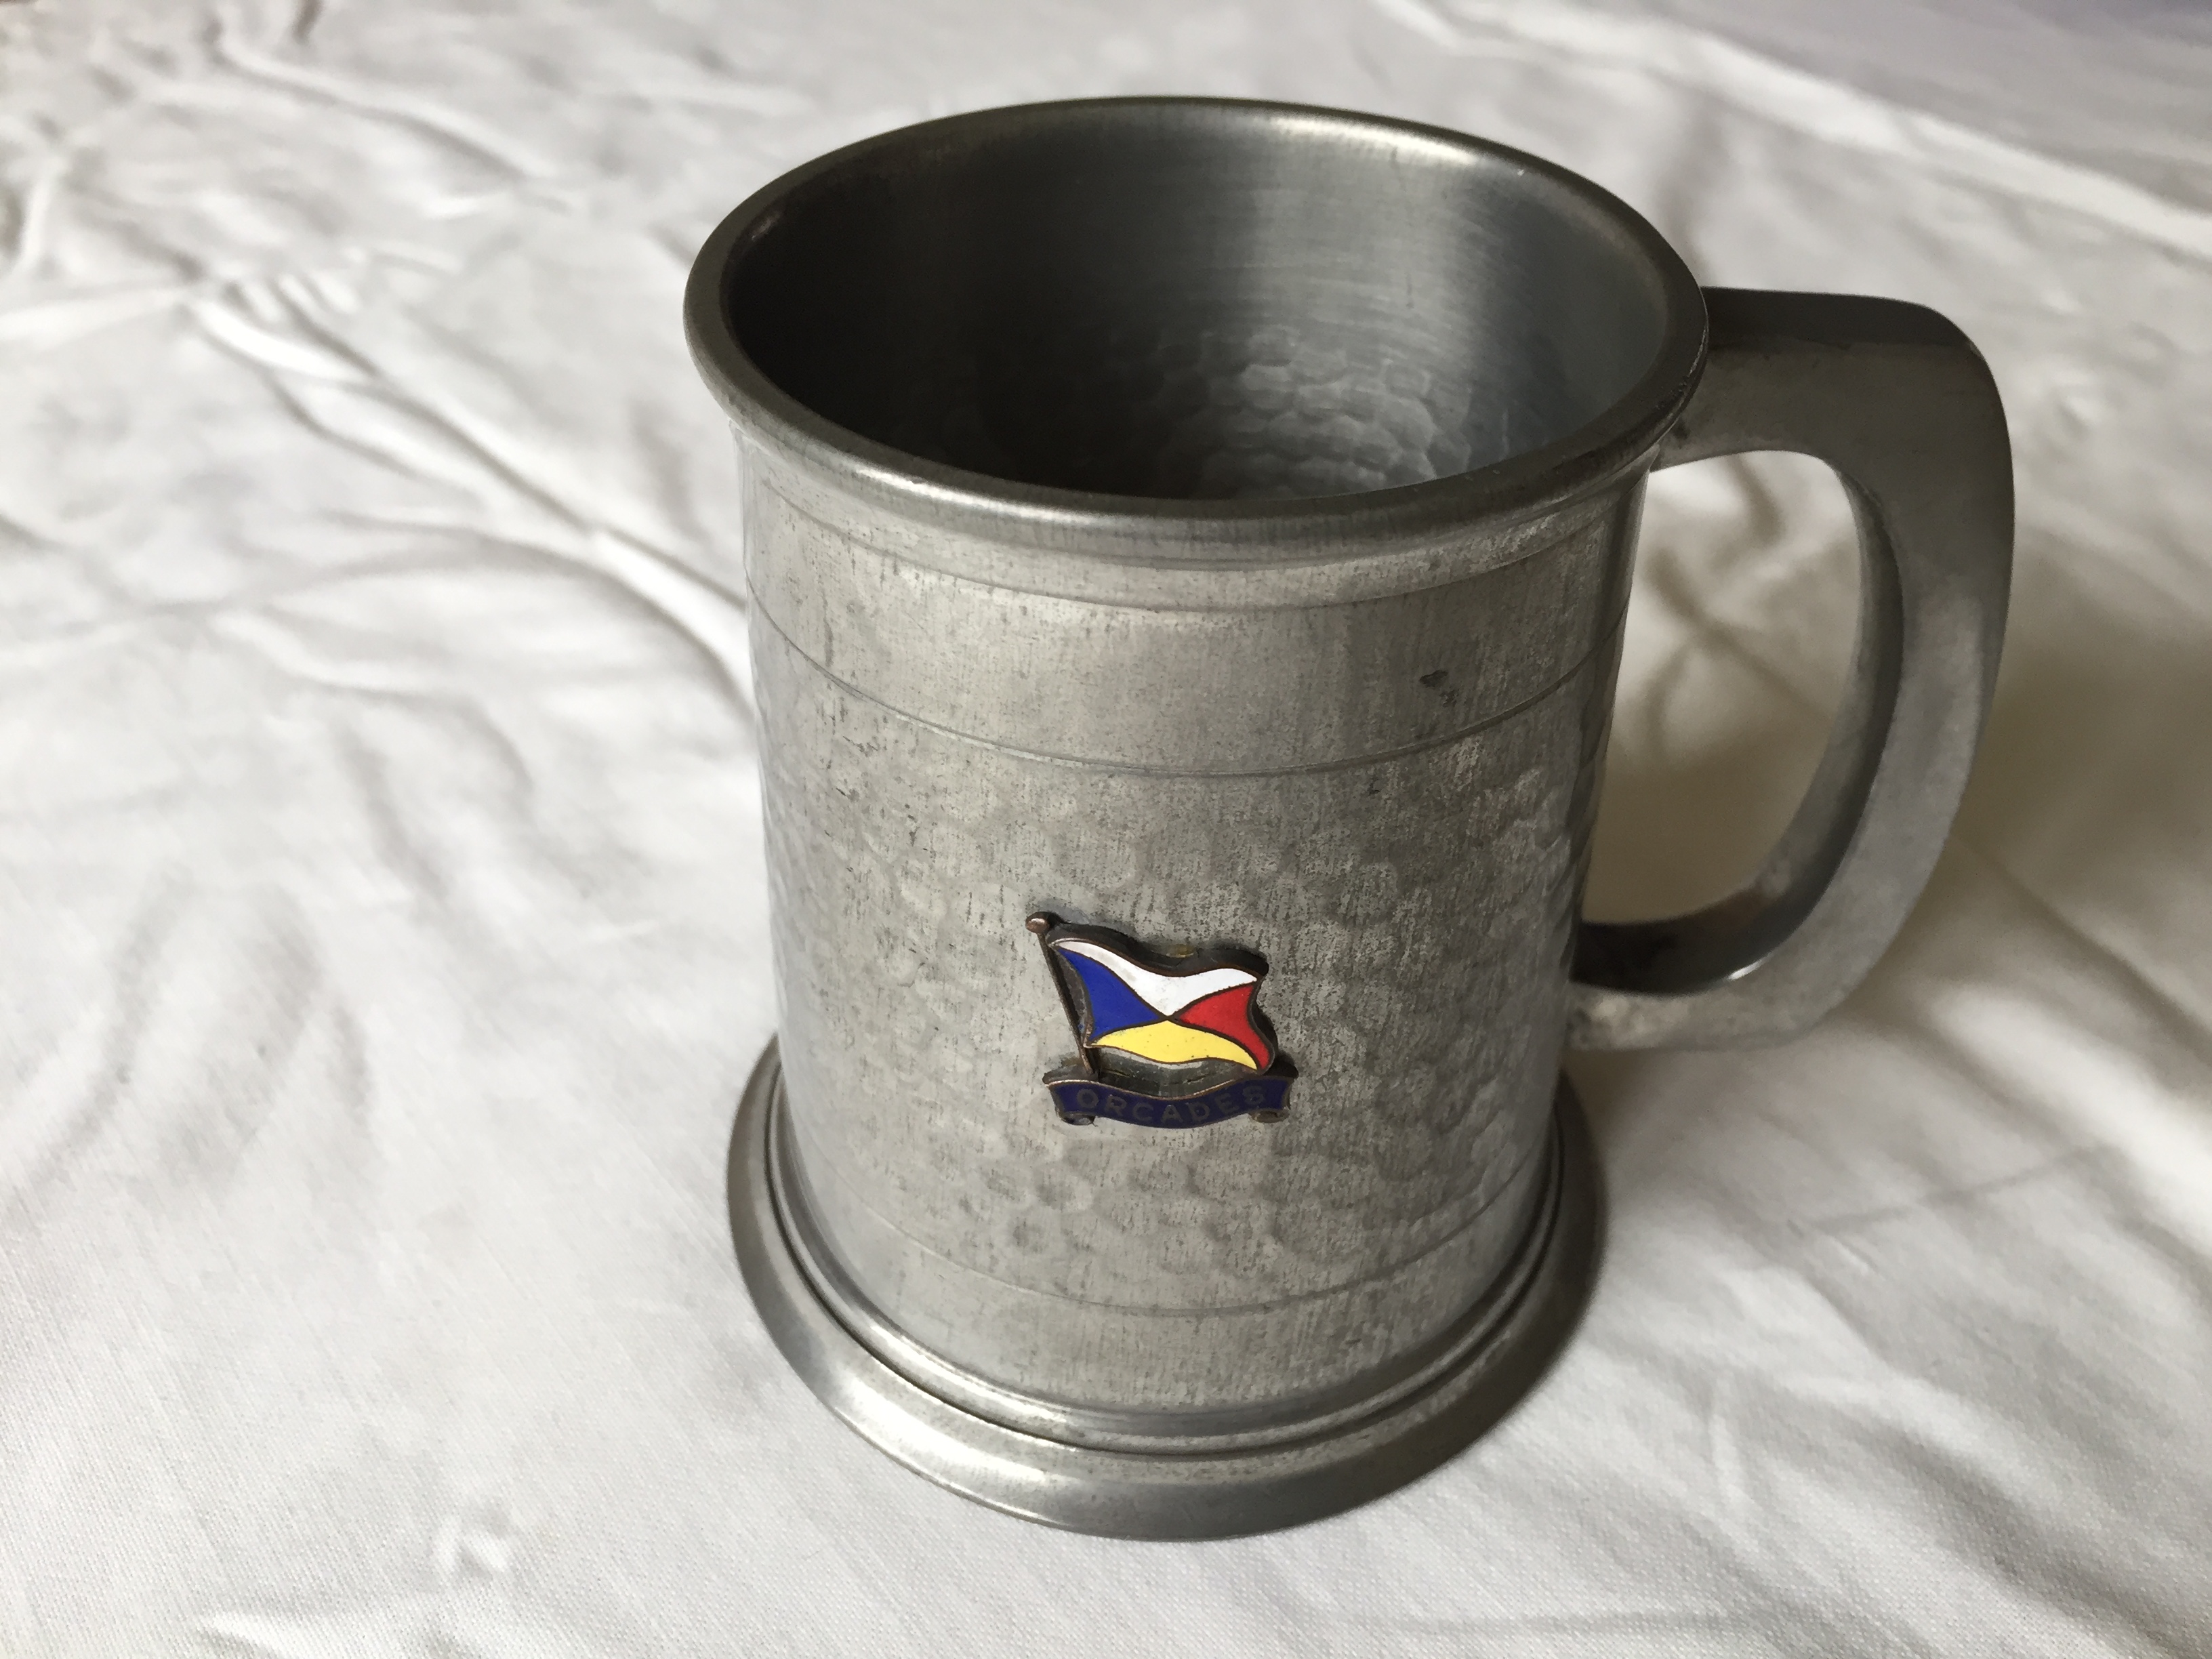 SMALL SOUVENIR TANKARD FROM THE ORIENT LINE VESSEL THE RMS ORCADES